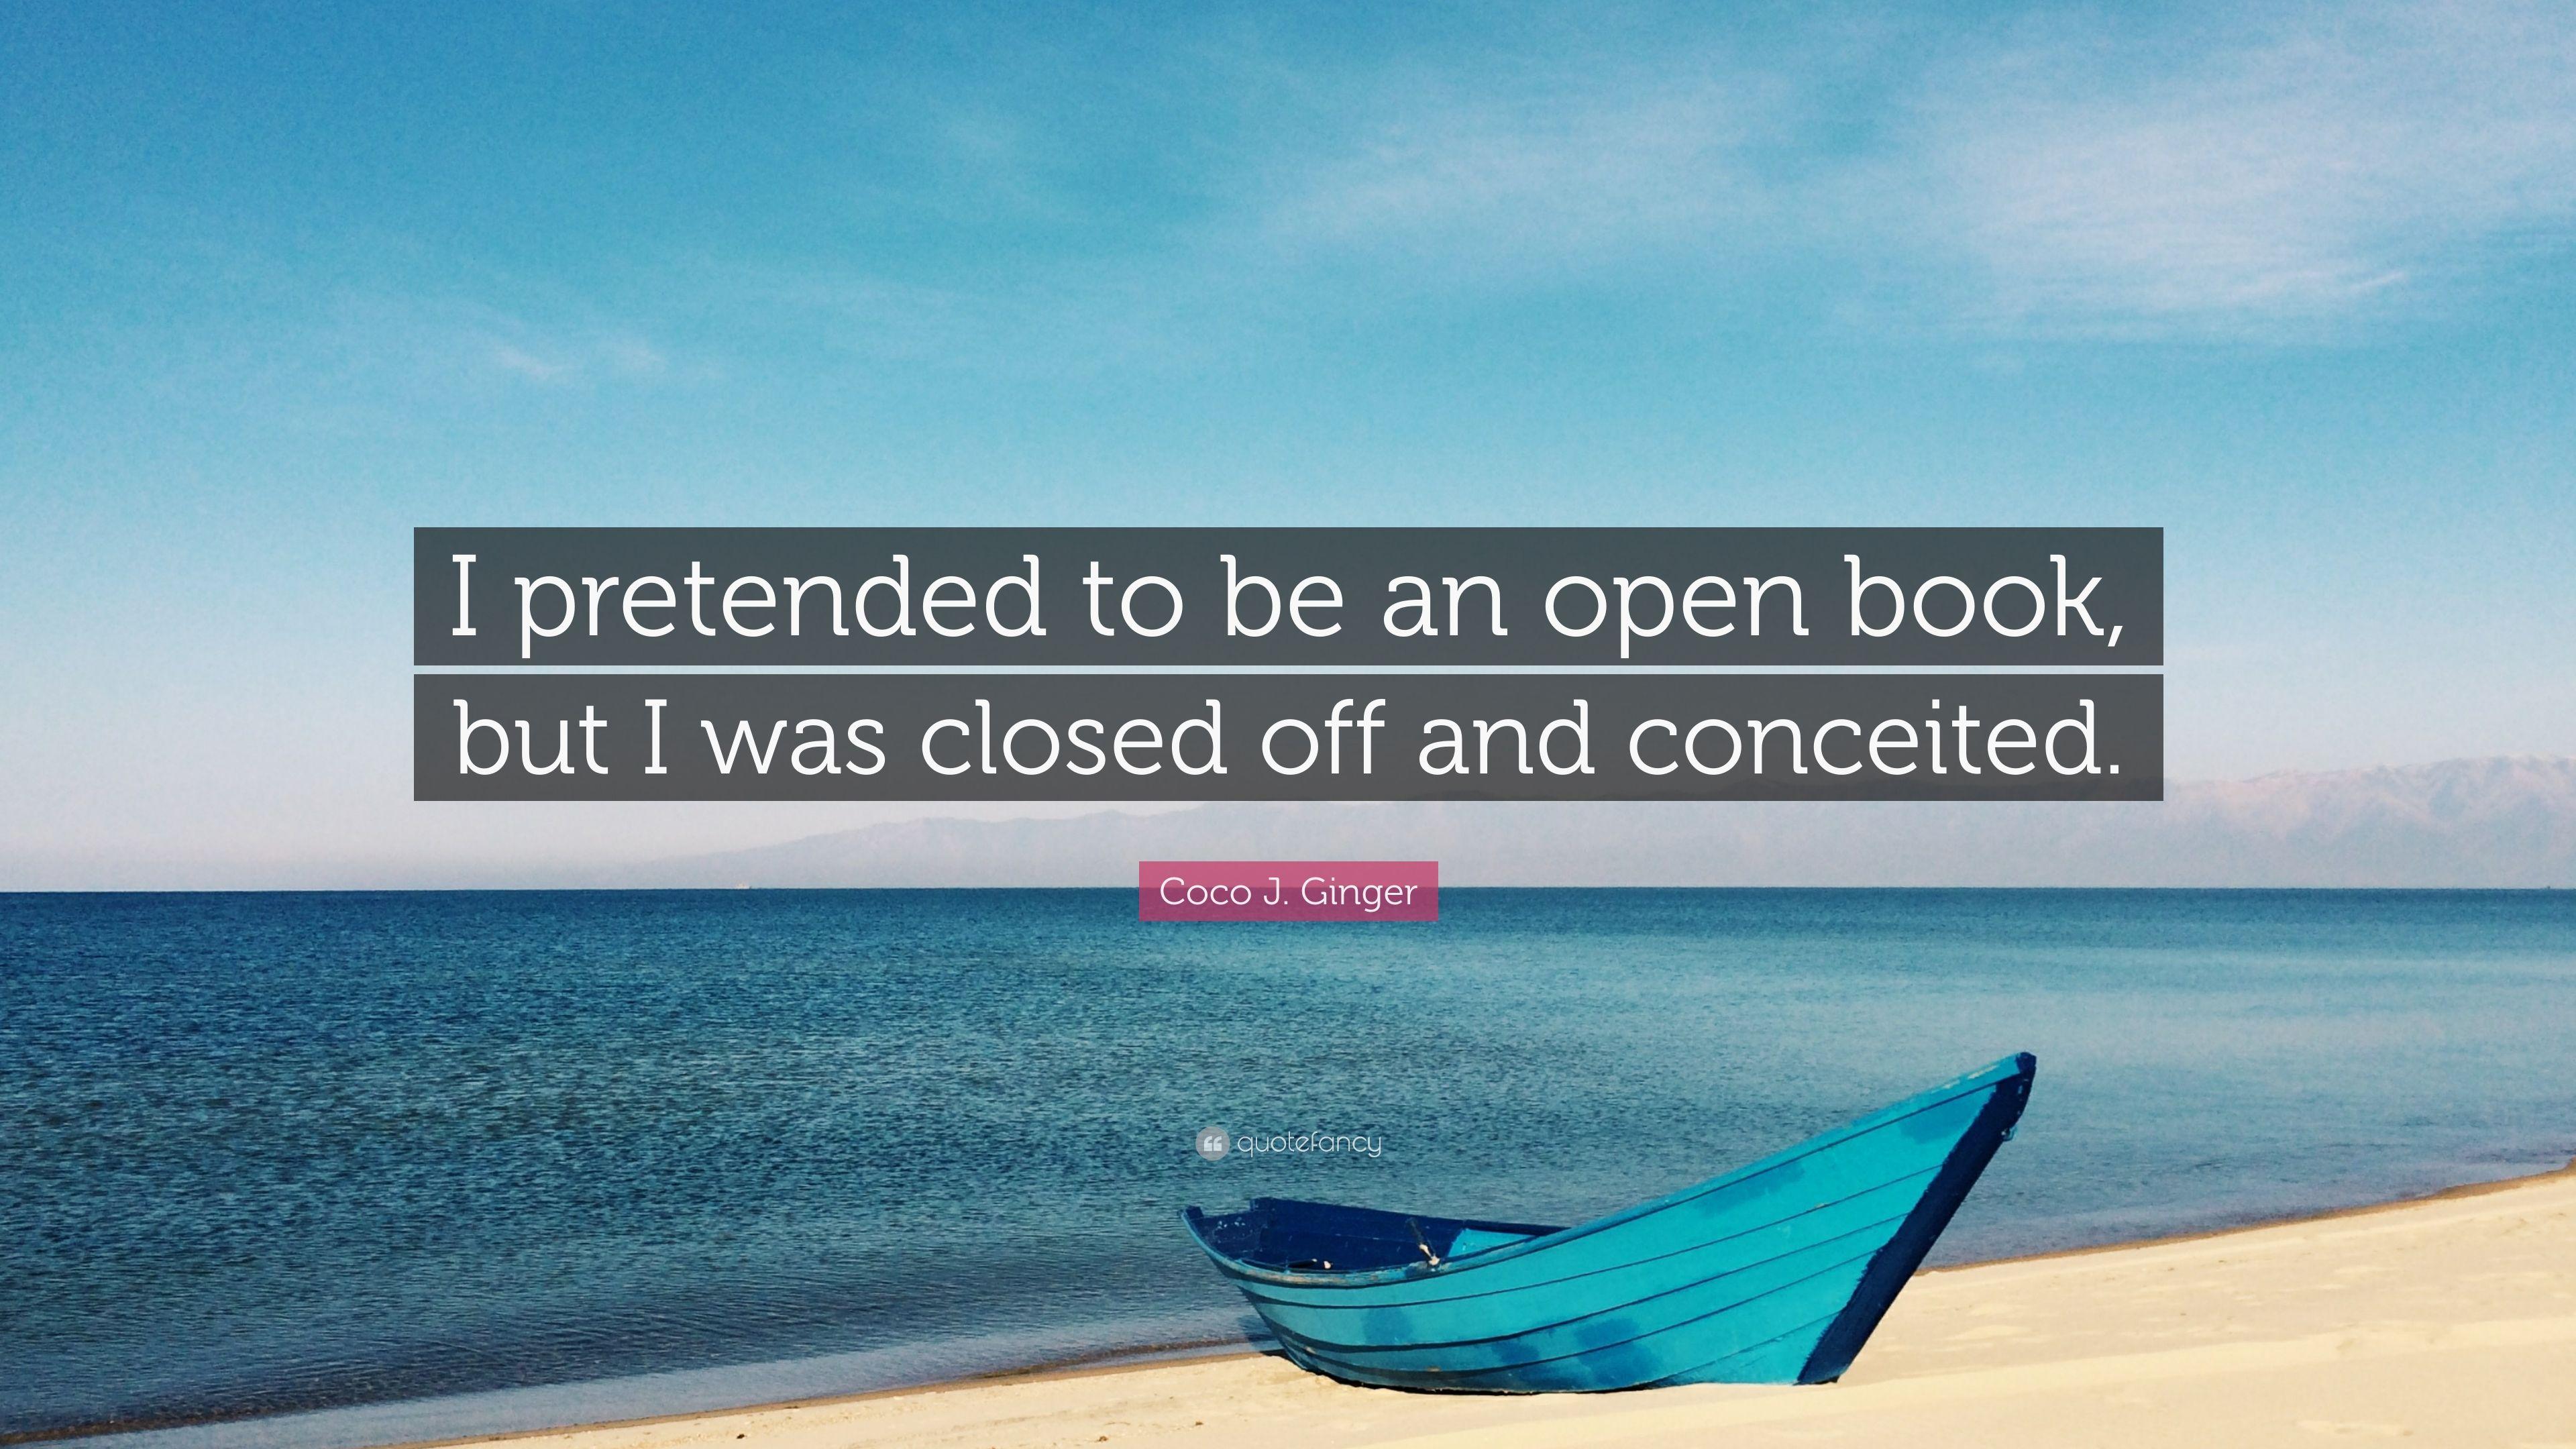 Coco J. Ginger Quote: “I pretended to be an open book, but I was